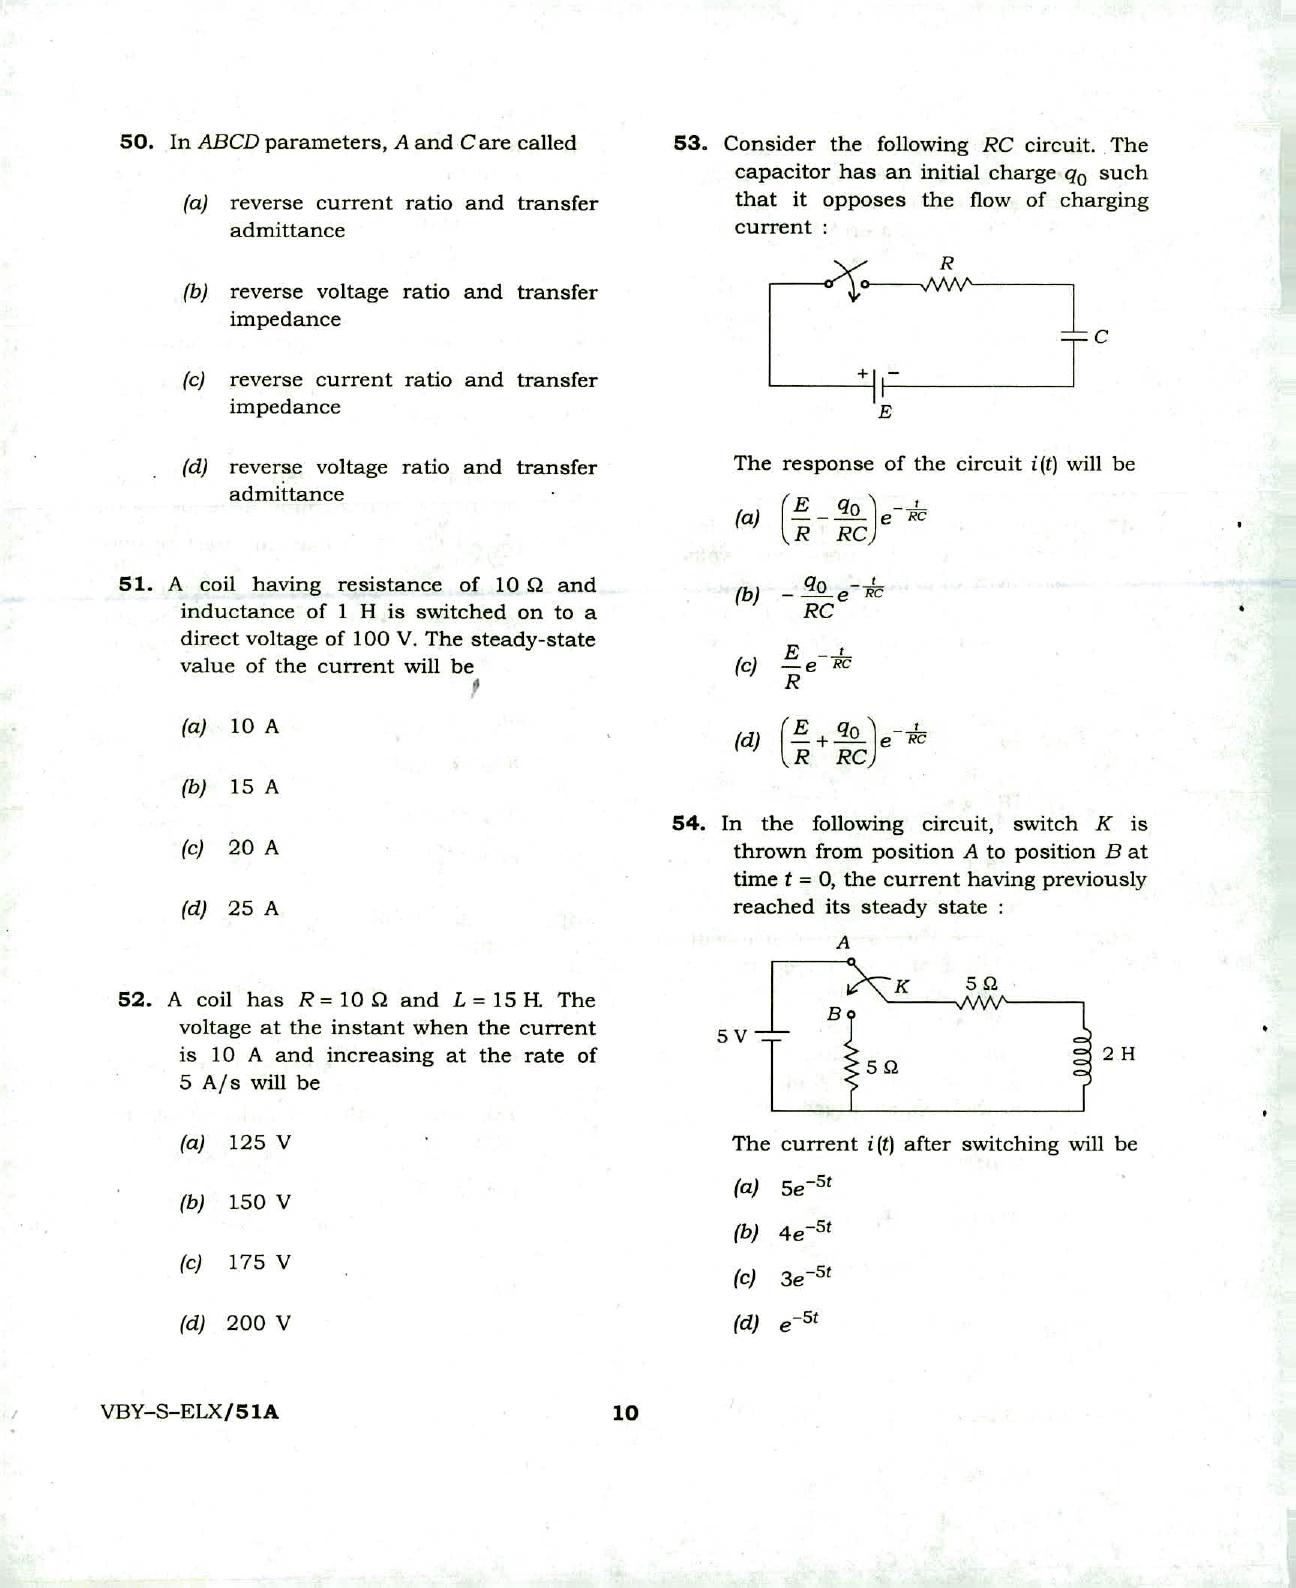 Electricity Department Lakshadweep Sample Papers: Electronic Engineering - Page 10